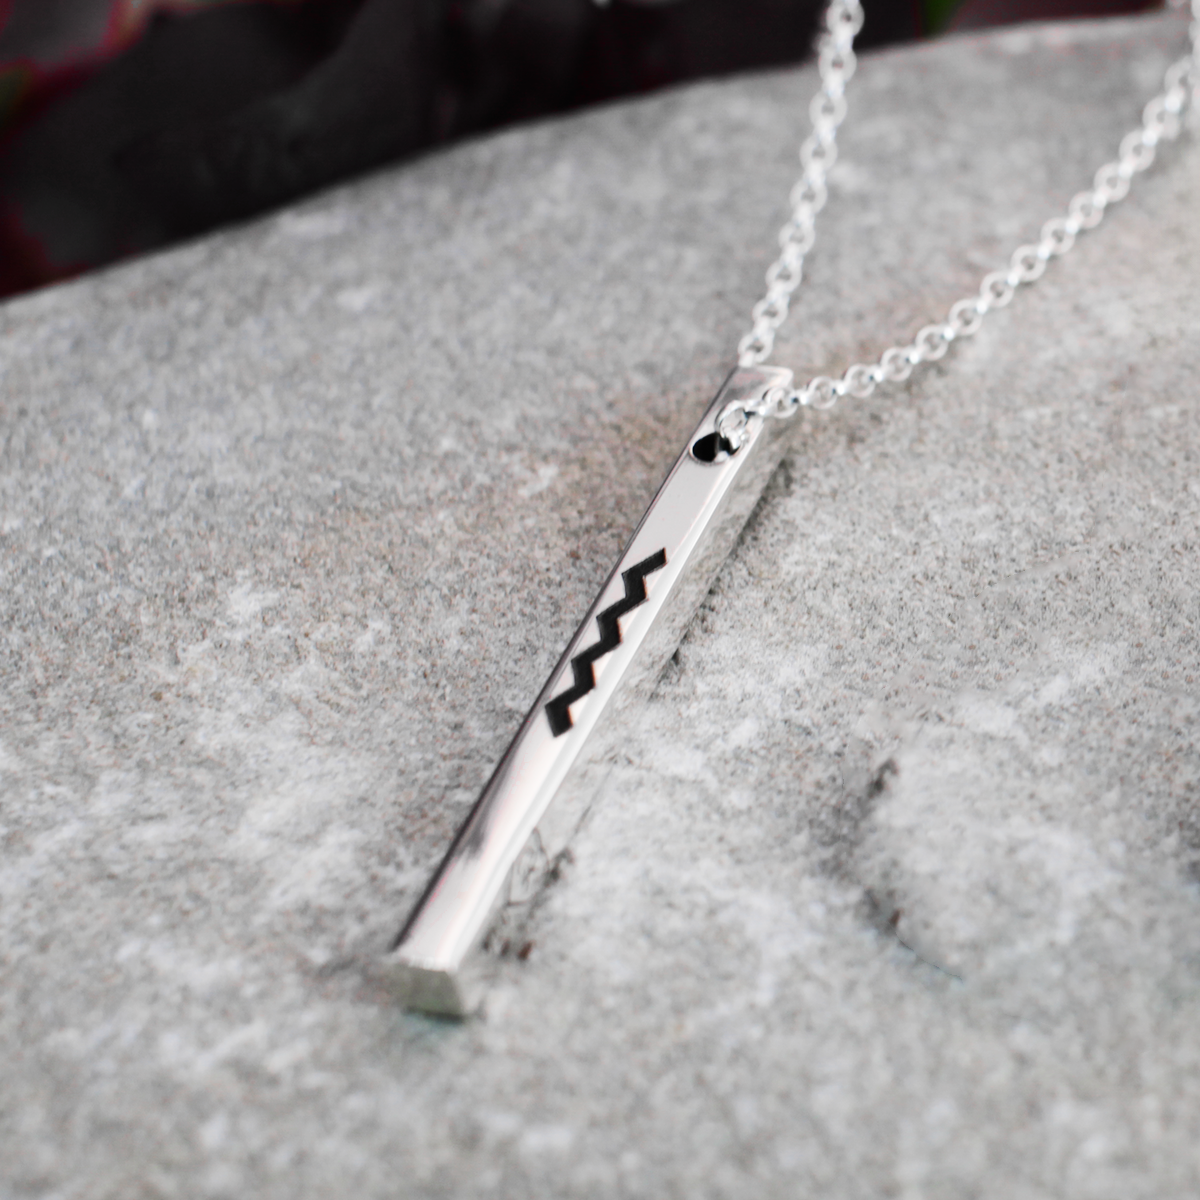 EIRE - Ogham Grá & Wild Atlantic Way High Polished Bar Silver Pendant Curated and designed by Emilio Sotelo Jewelry for Croi Kinsale Jewellery in Kinsale West Cork Ireland Europe. Find exceptional handmade silver and gold jewellery at affordable prices for birthday gifts and Christmas presents. Find Irish designers and makers. Beautiful jewellery shop located in Kinsale, Co. Cork.